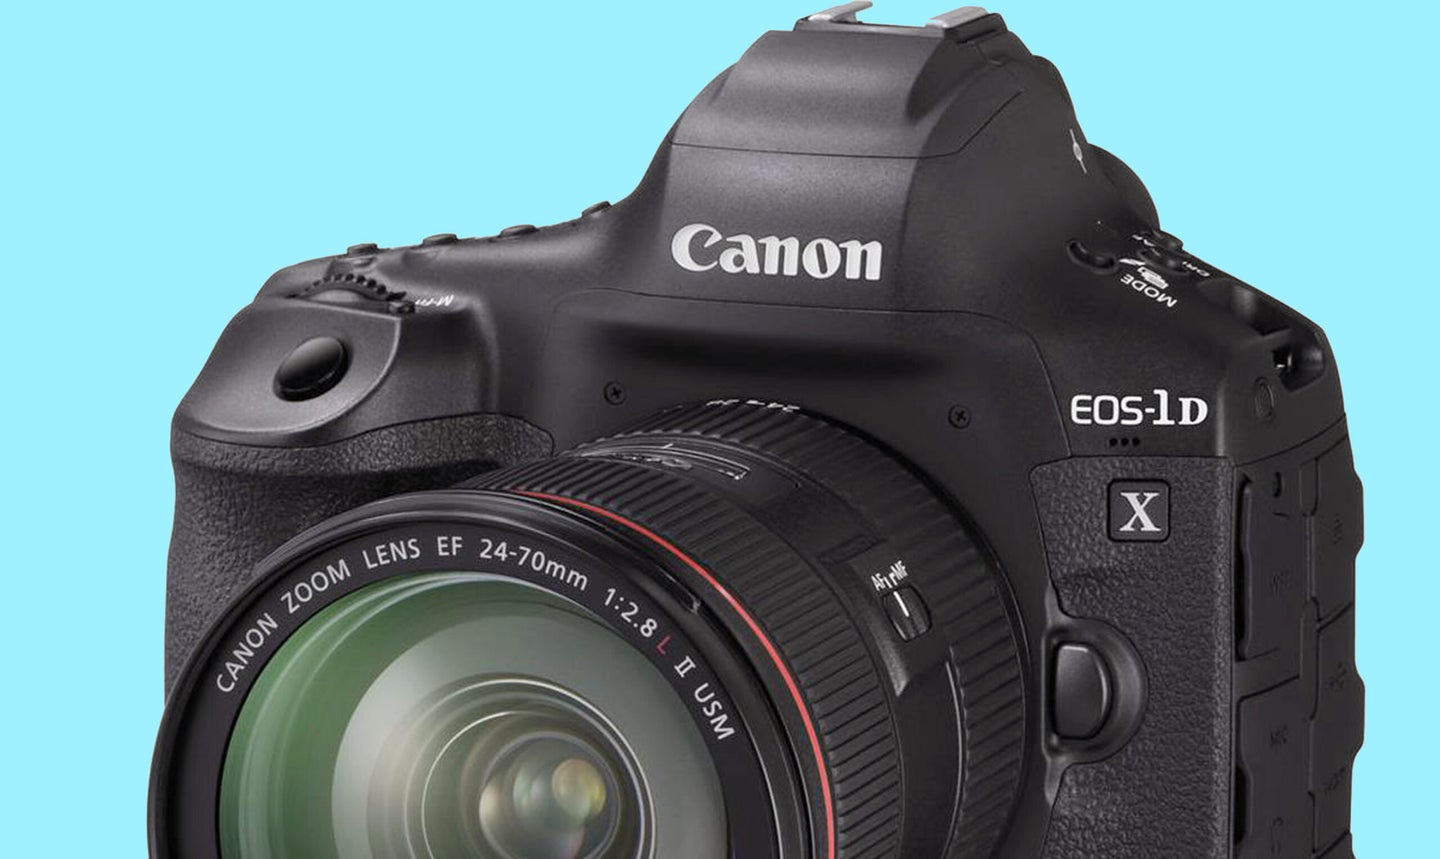 The Canon EOS 1D X Mark III marks the end of the DSLR era.